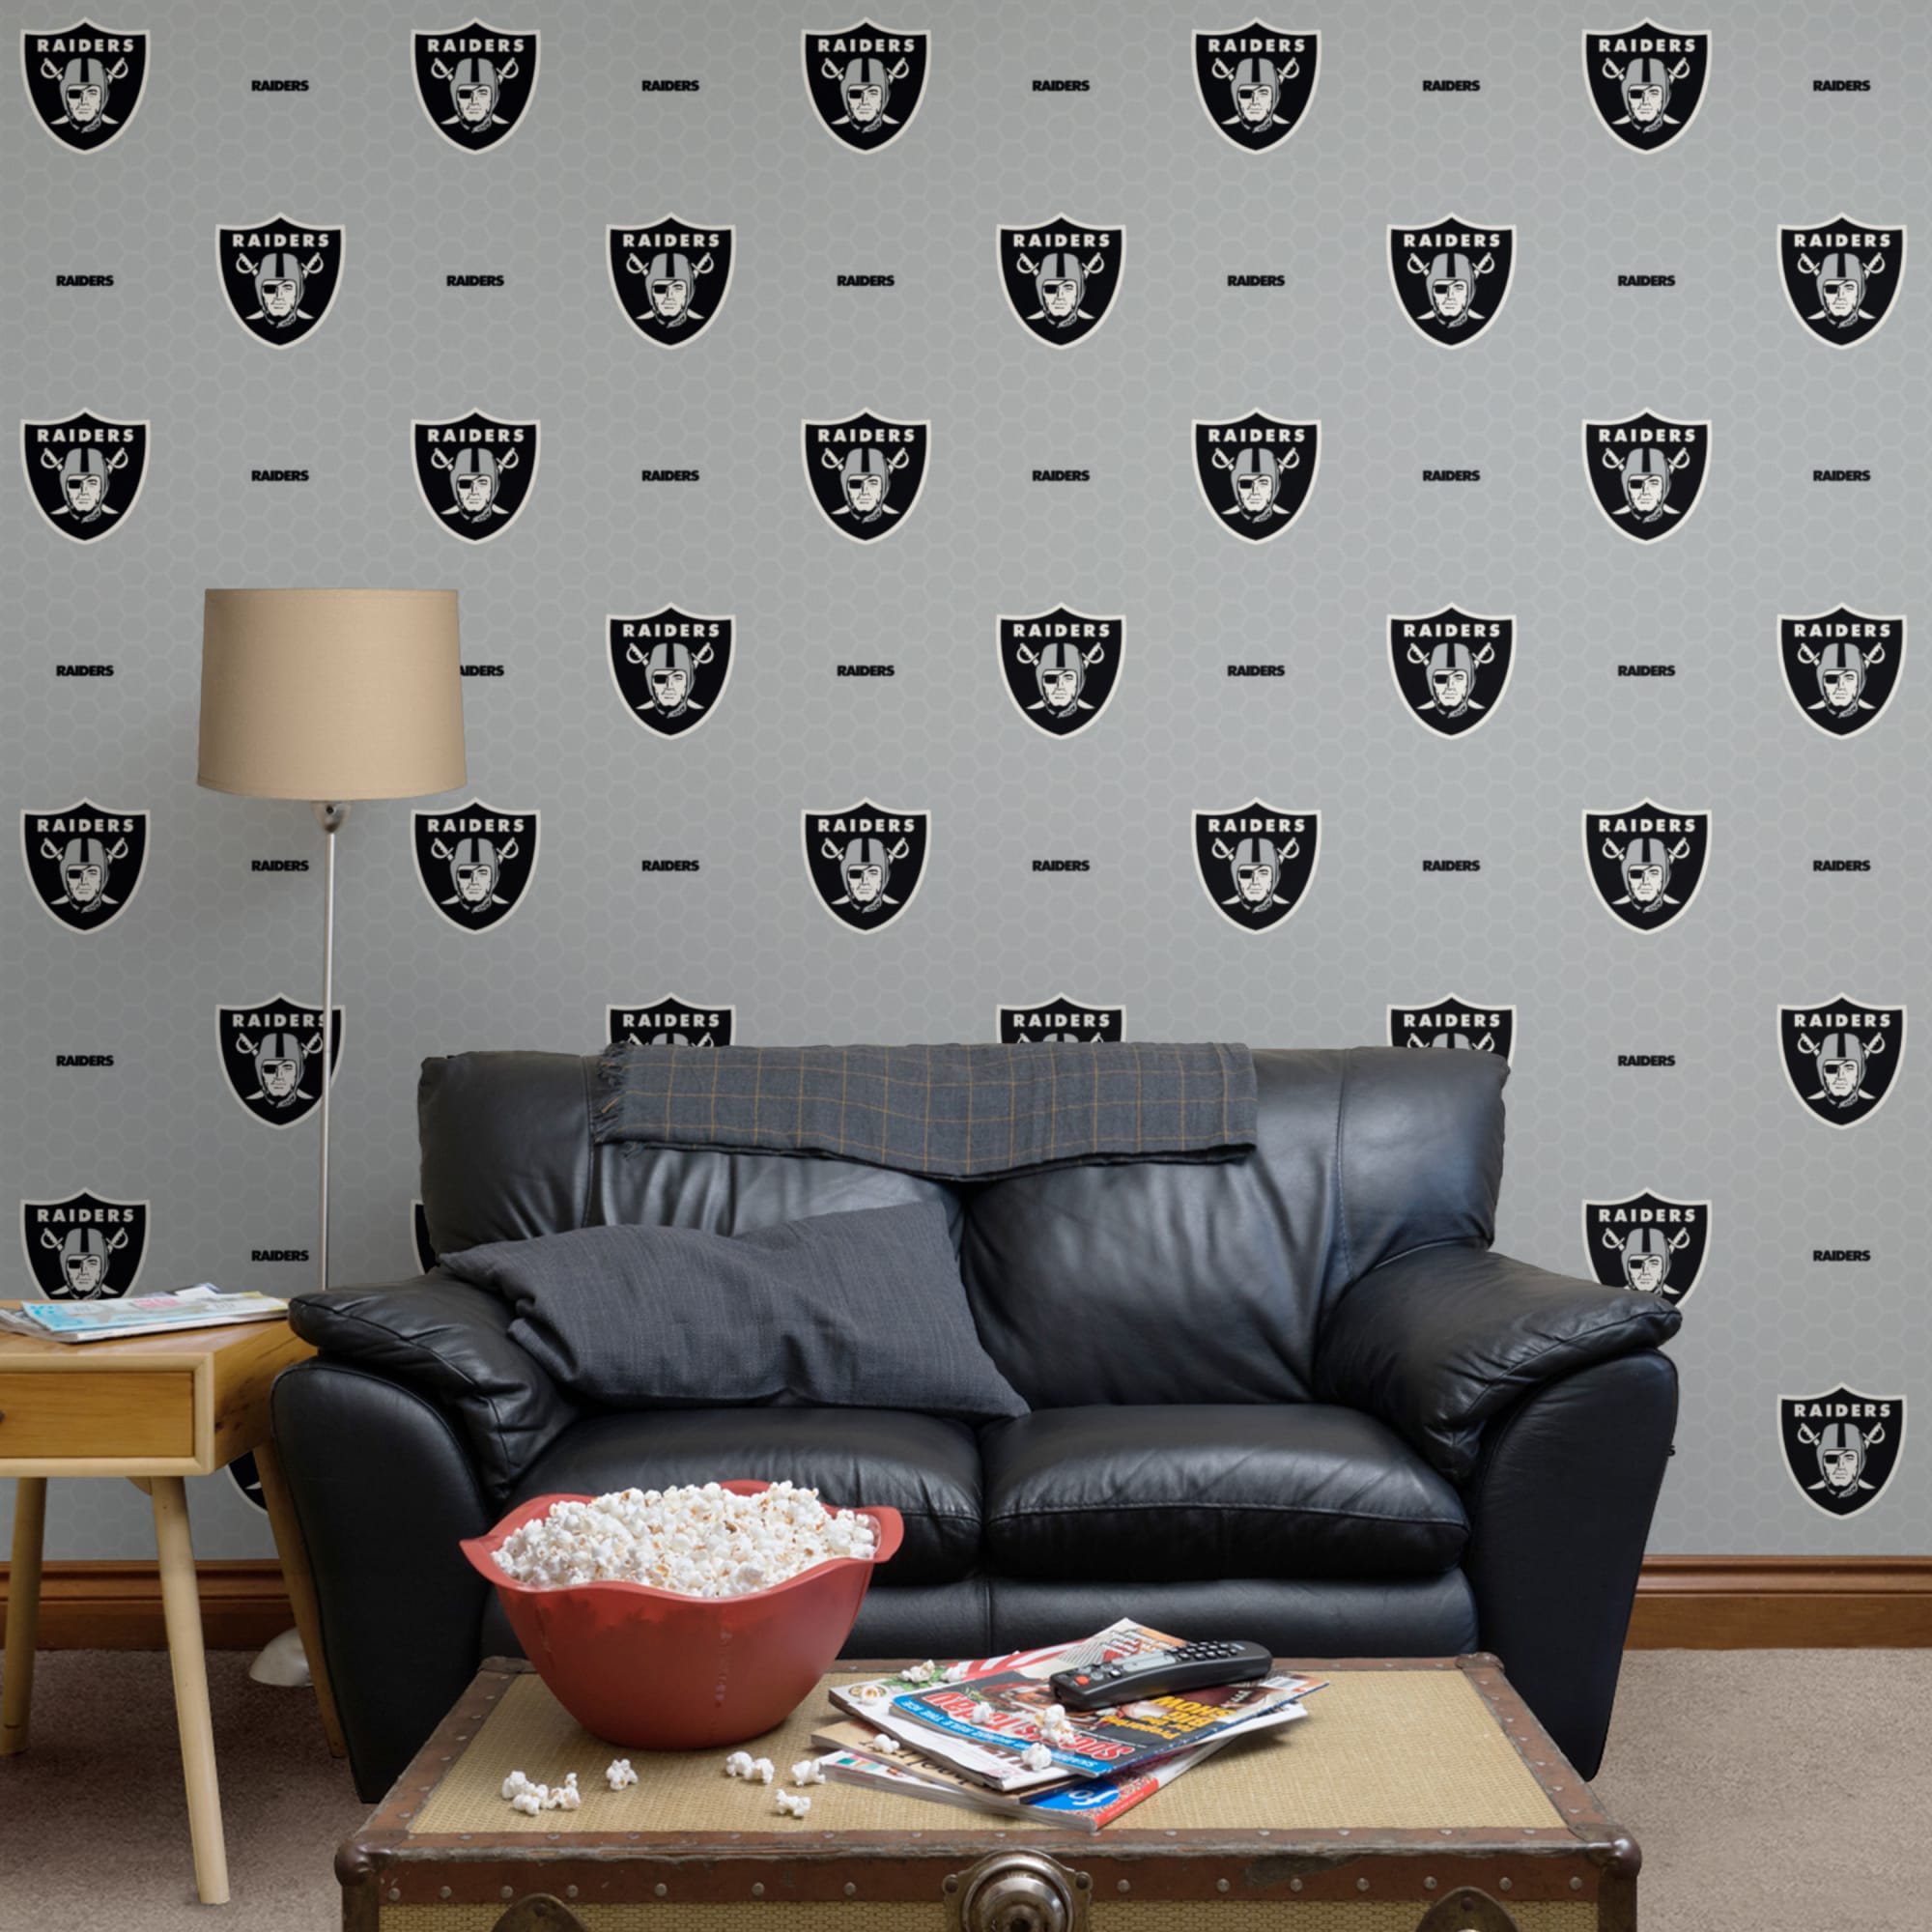 Las Vegas Raiders: Logo Pattern - Officially Licensed NFL Removable Wallpaper 12" x 12" Sample by Fathead